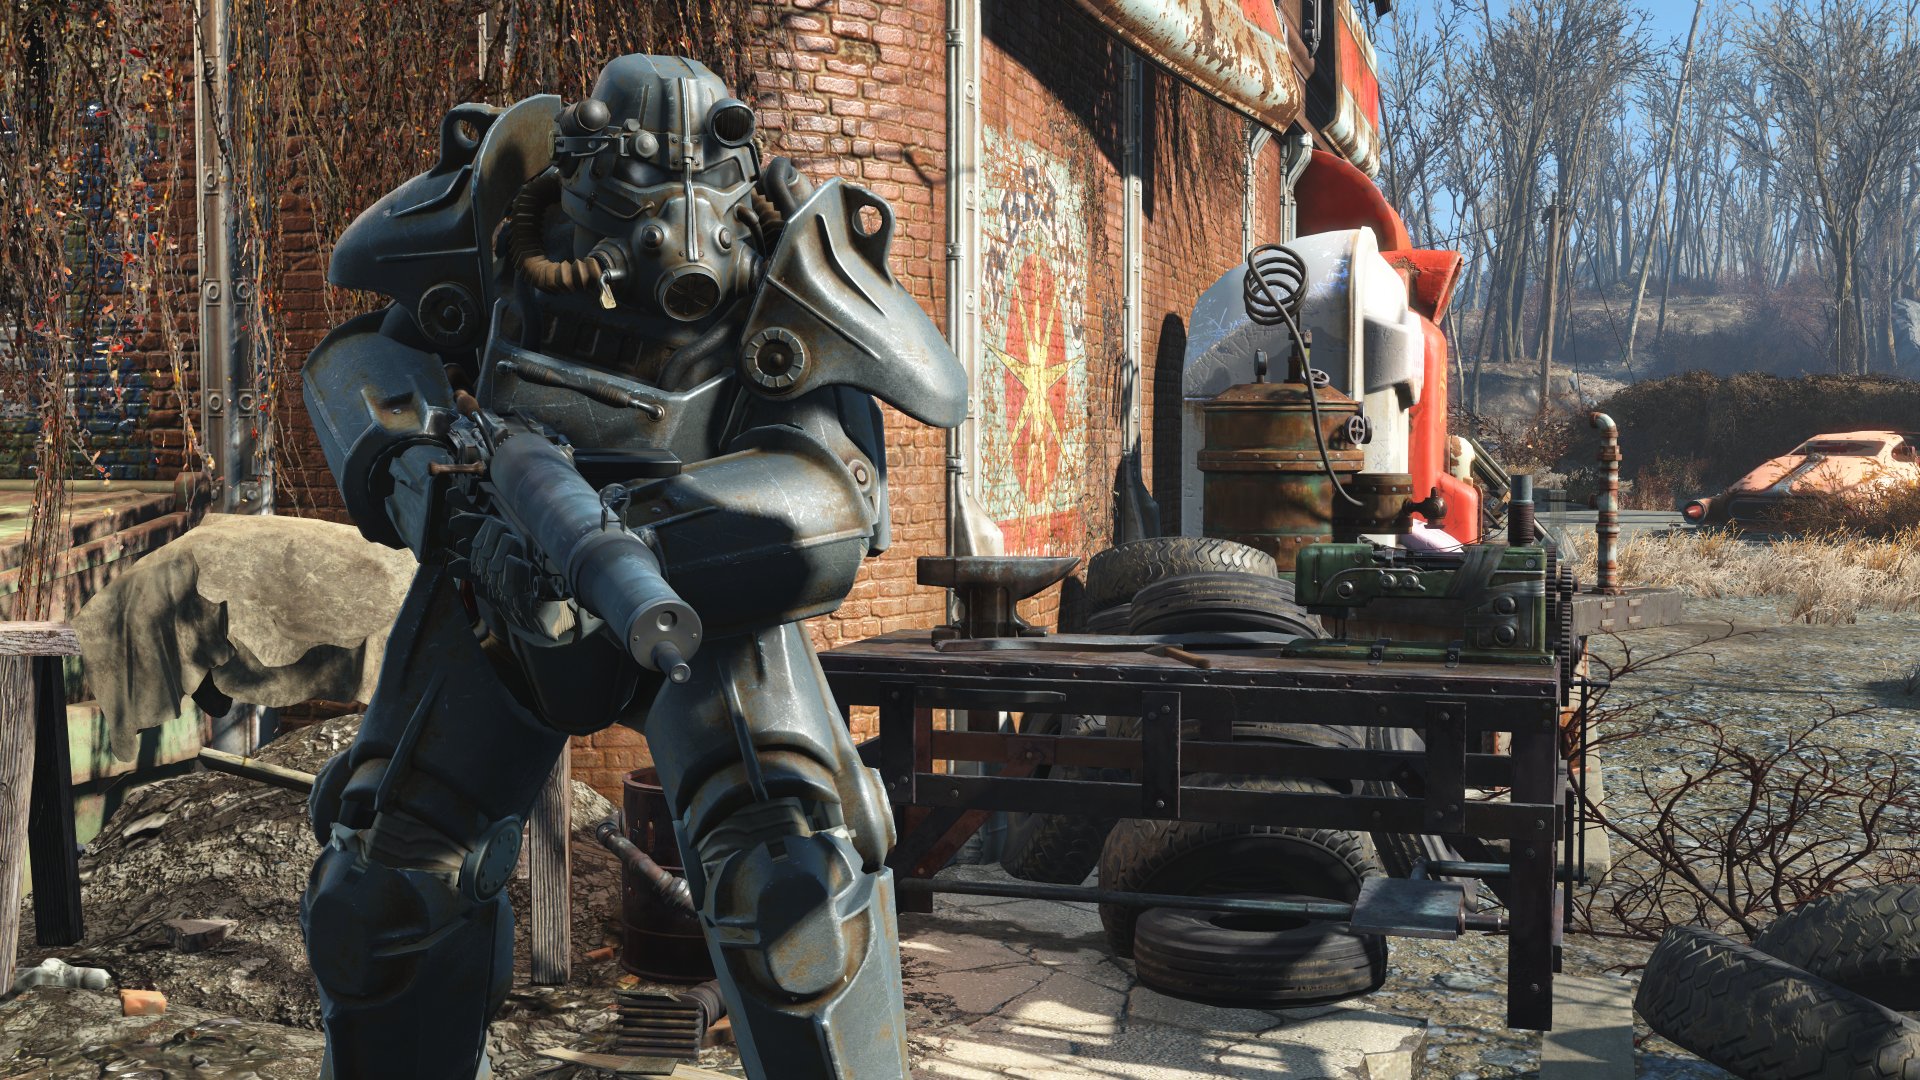 Fallout 4 Is Getting A Game Of The Year Edition With All The Dlc Included Videogamer Com